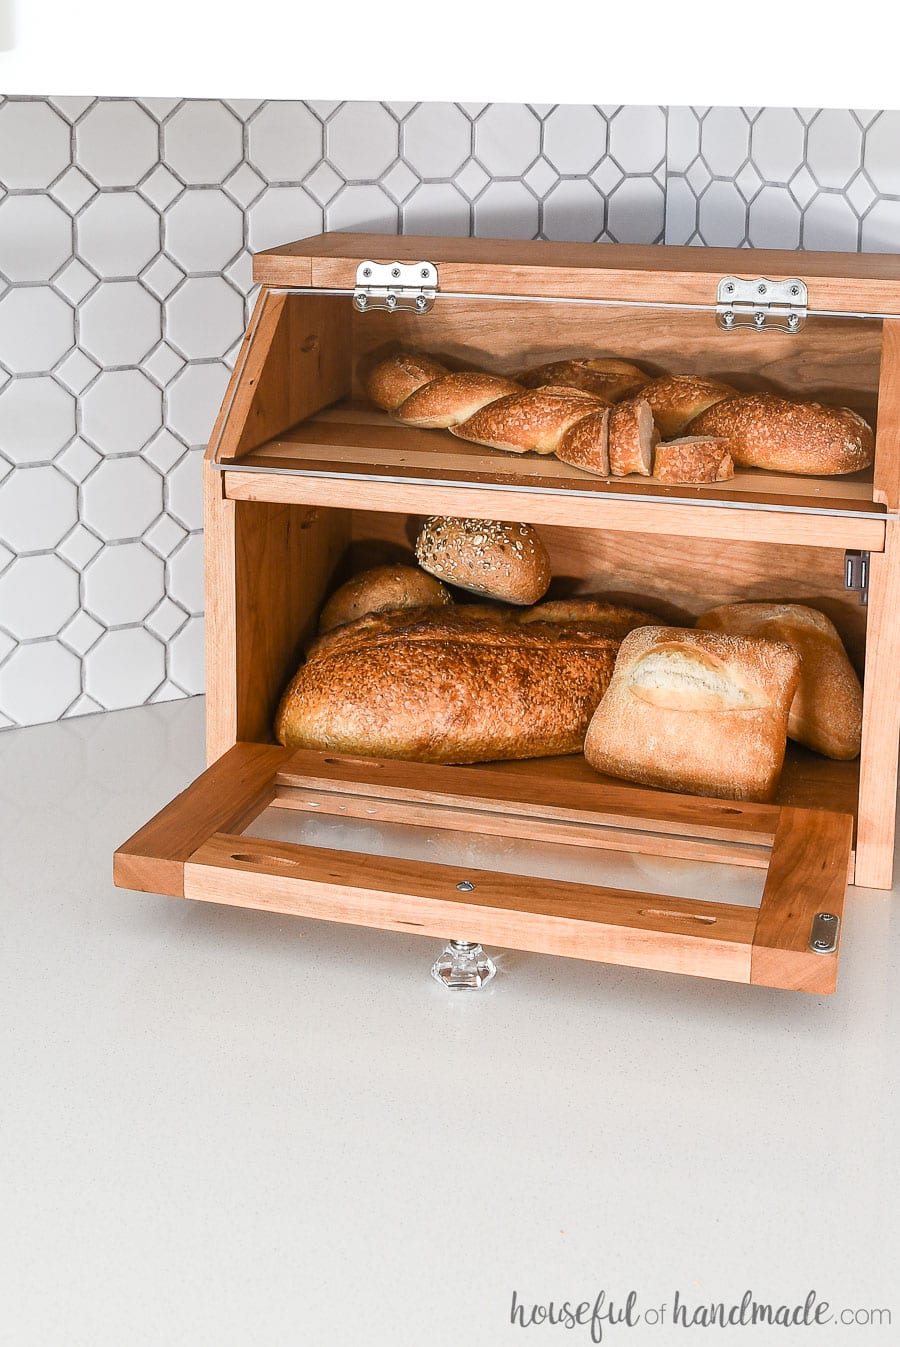 Lower door of the DIY bread box open to show how much room there is inside.